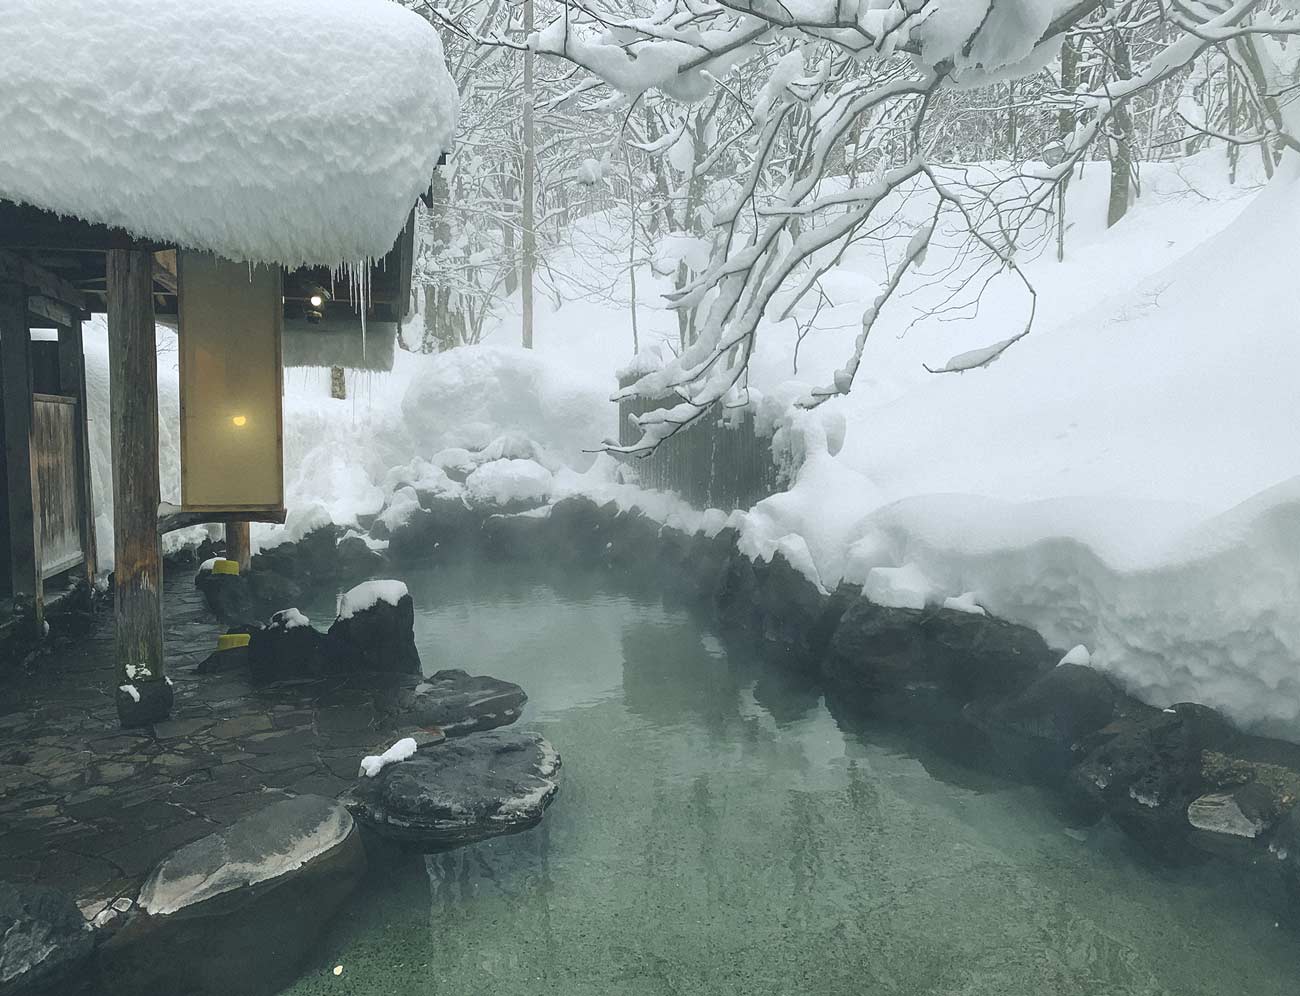 Onsen in Japan in a snow covered forest